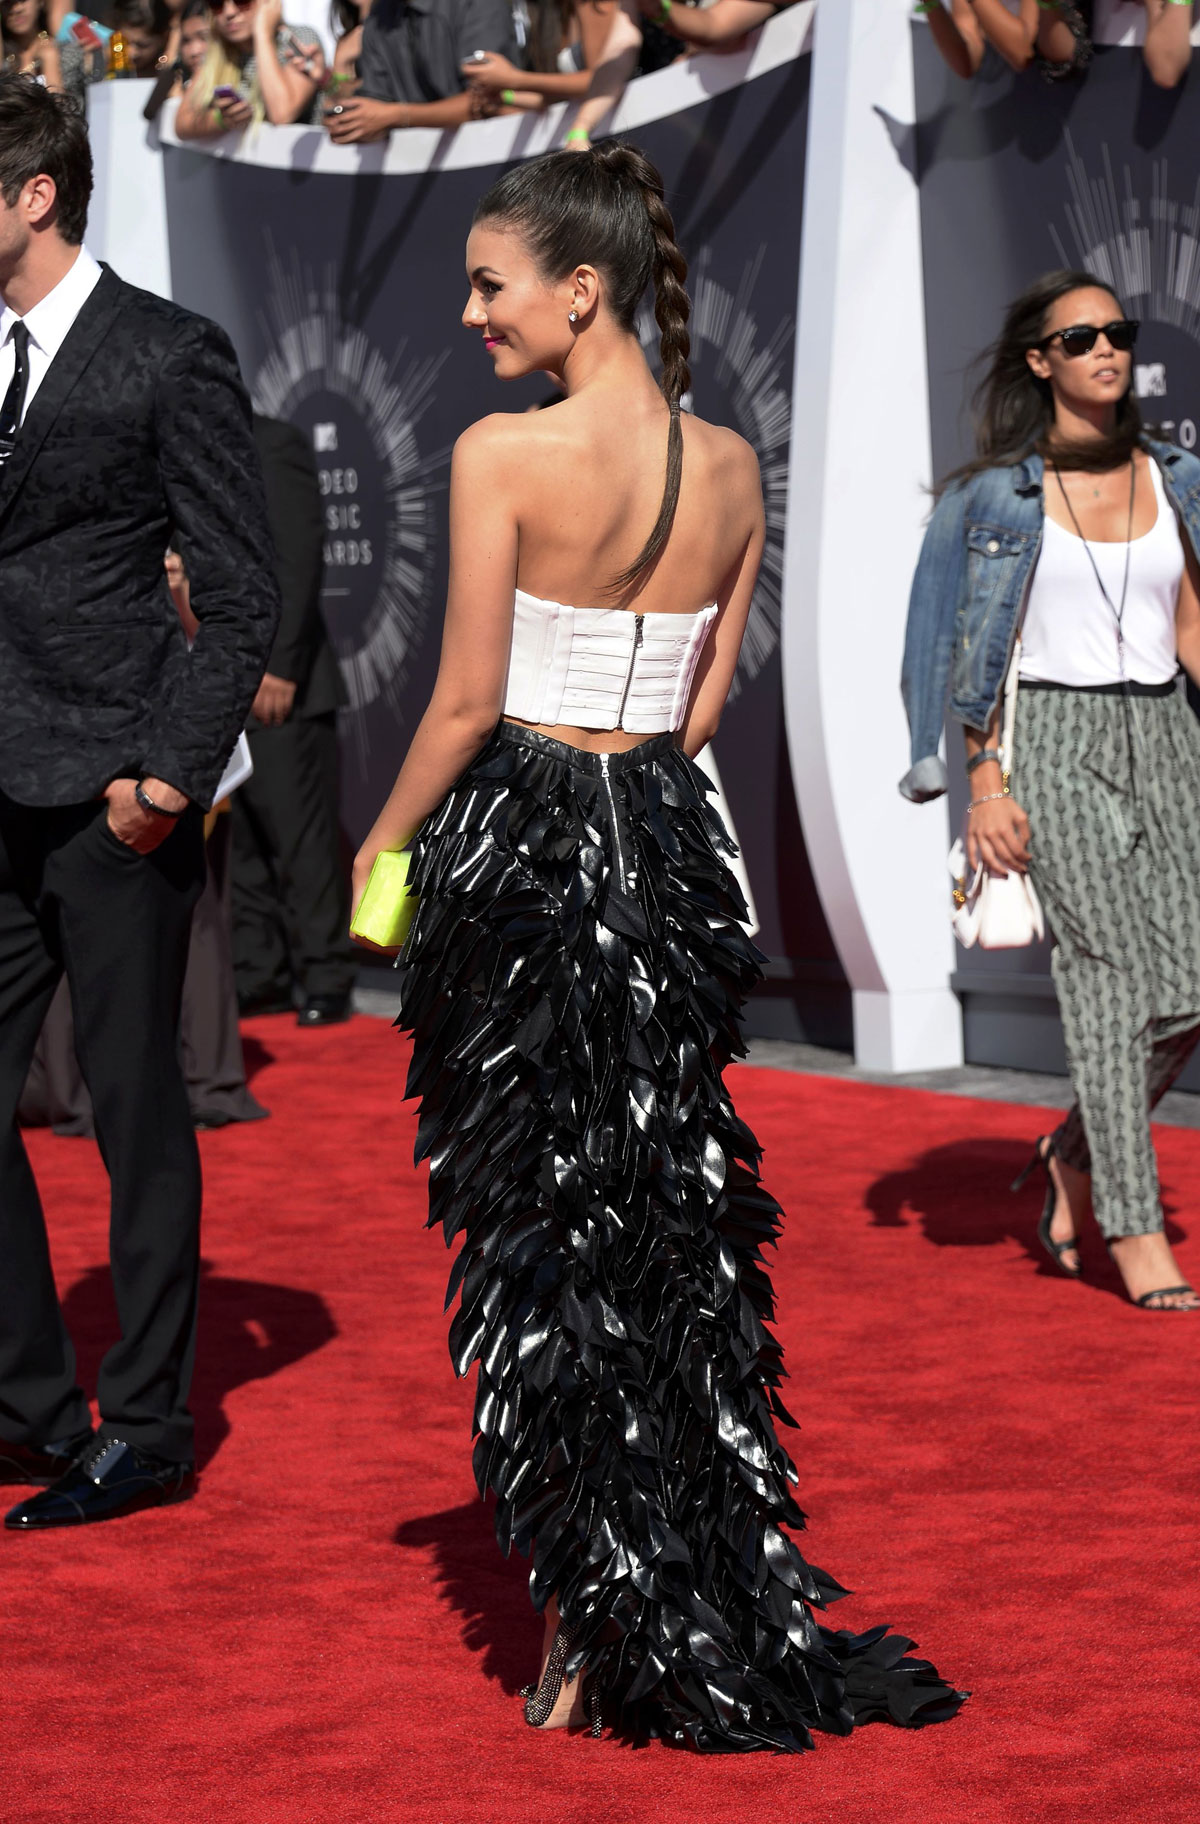 Victoria Justice attends 2014 MTV Video Music Awards